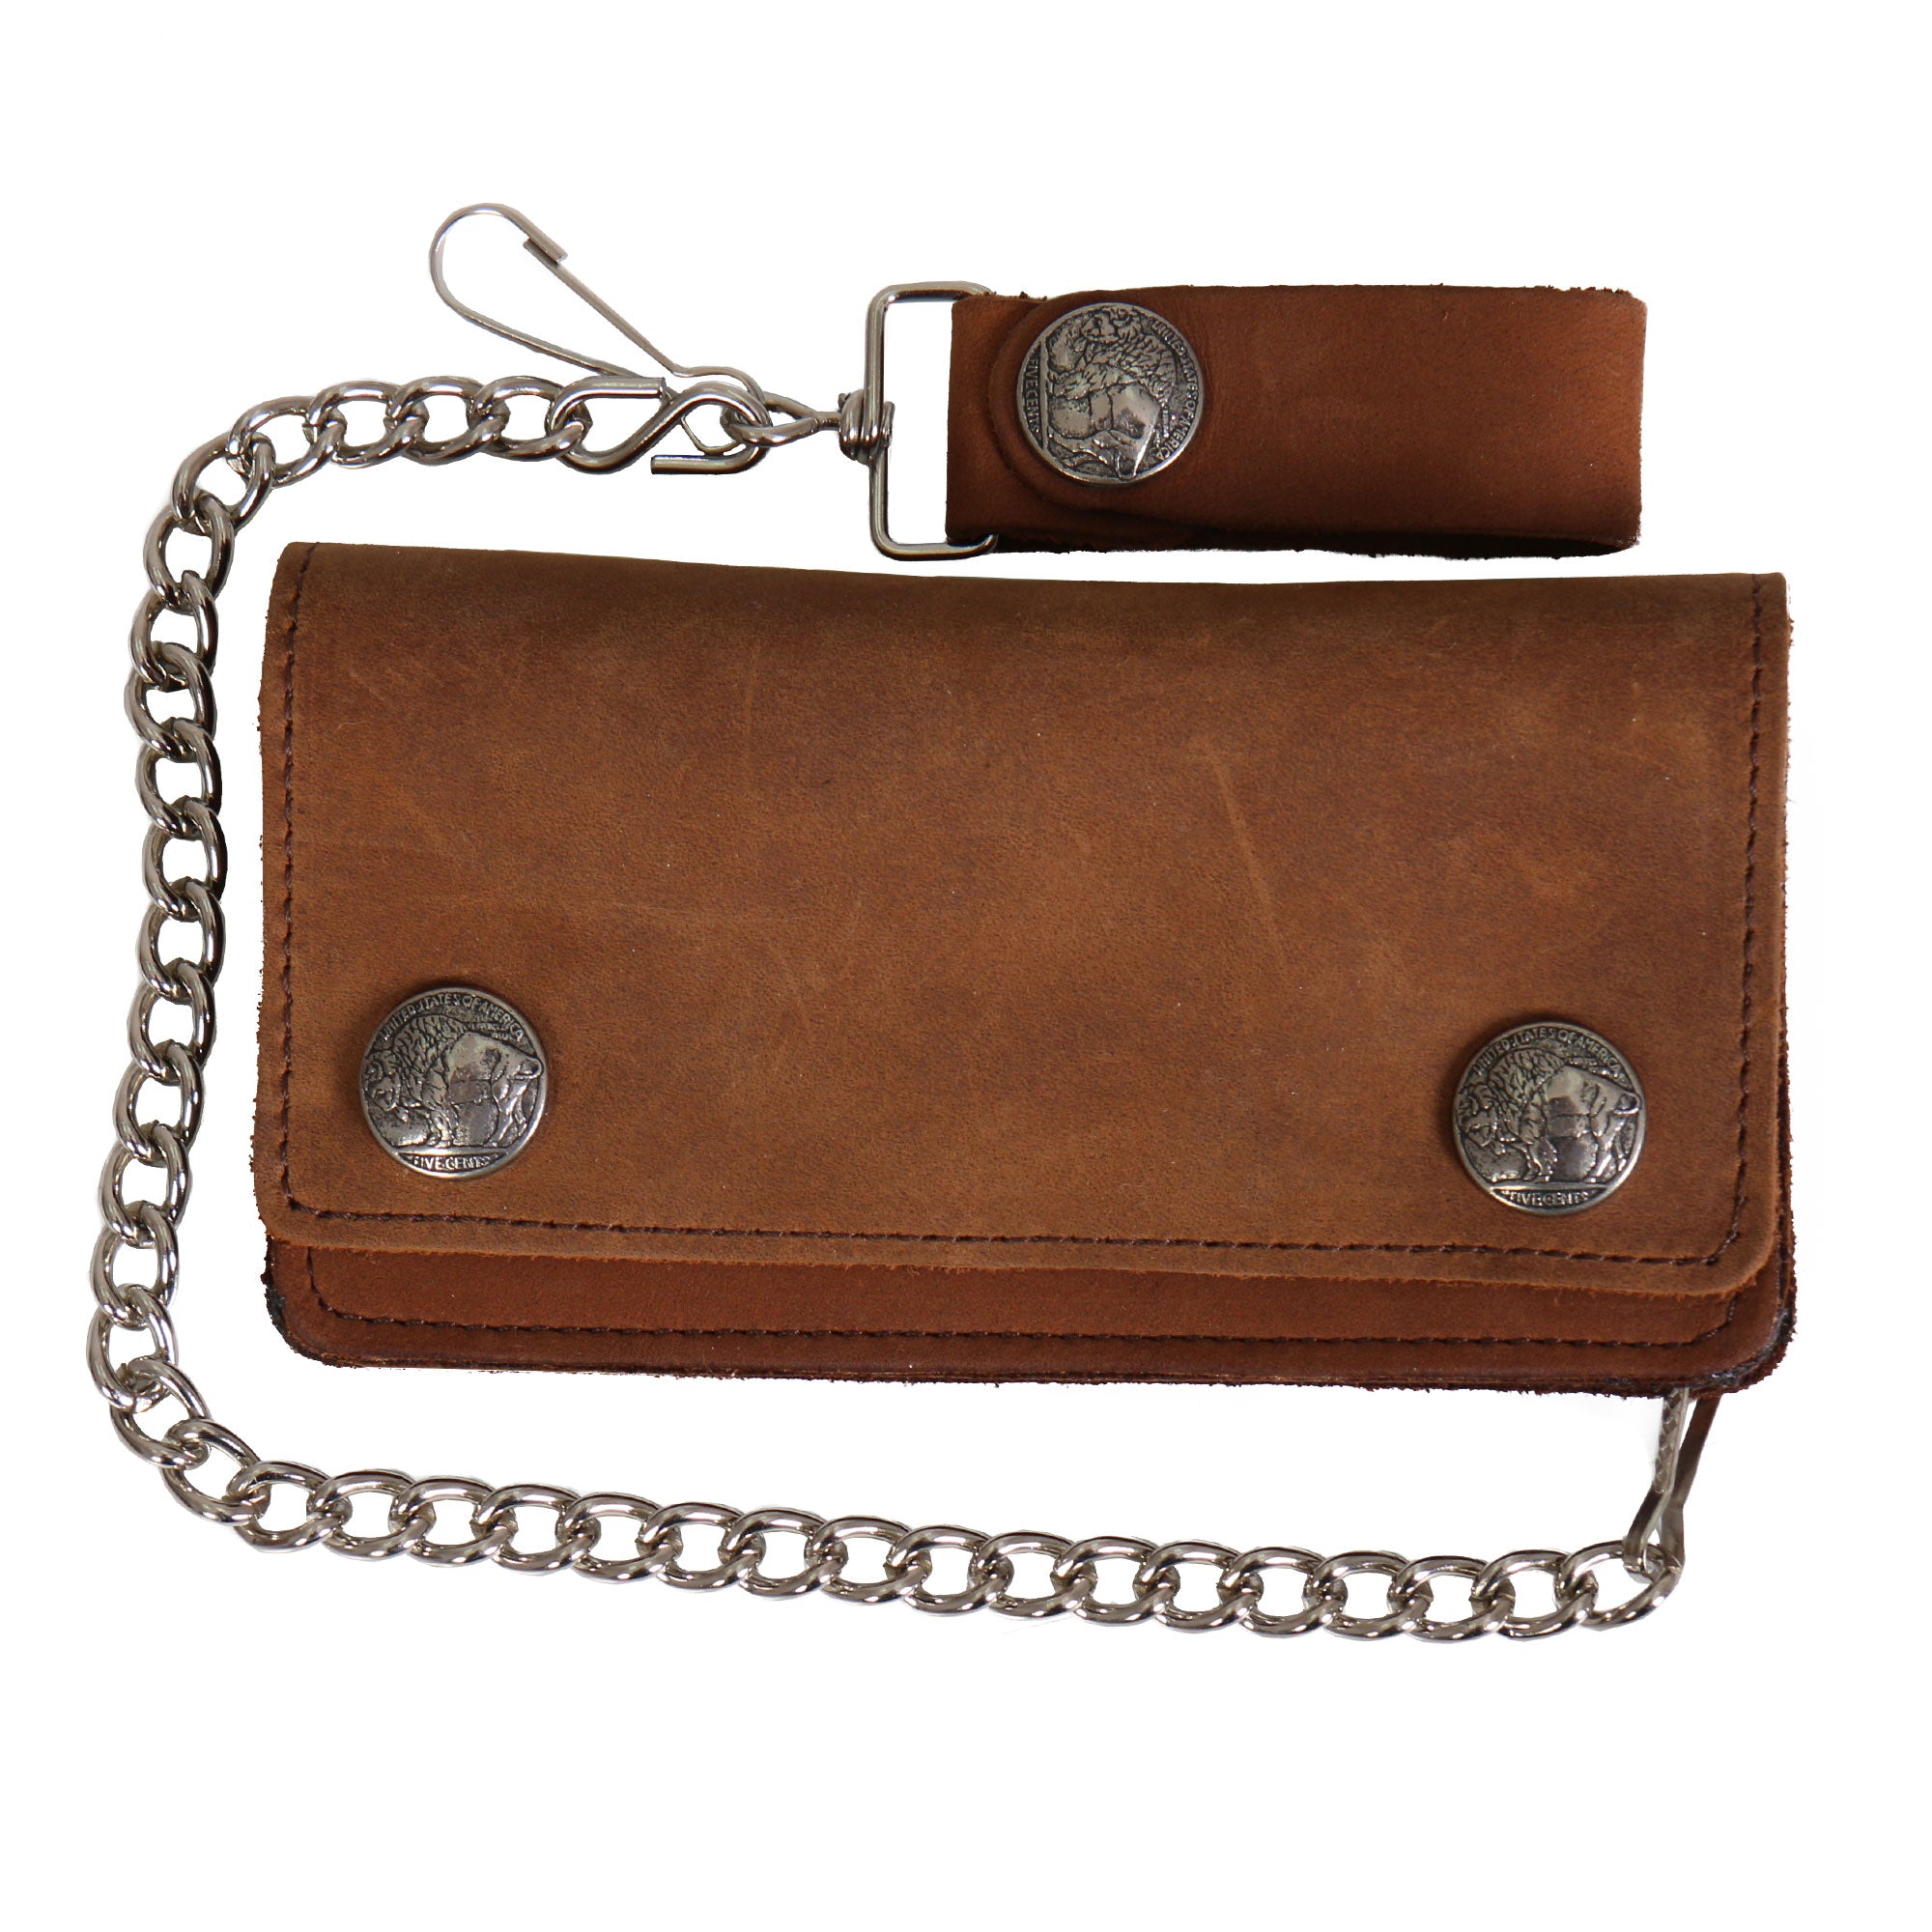 Buffalo Leather Bifold Wallet with Coin Pocket